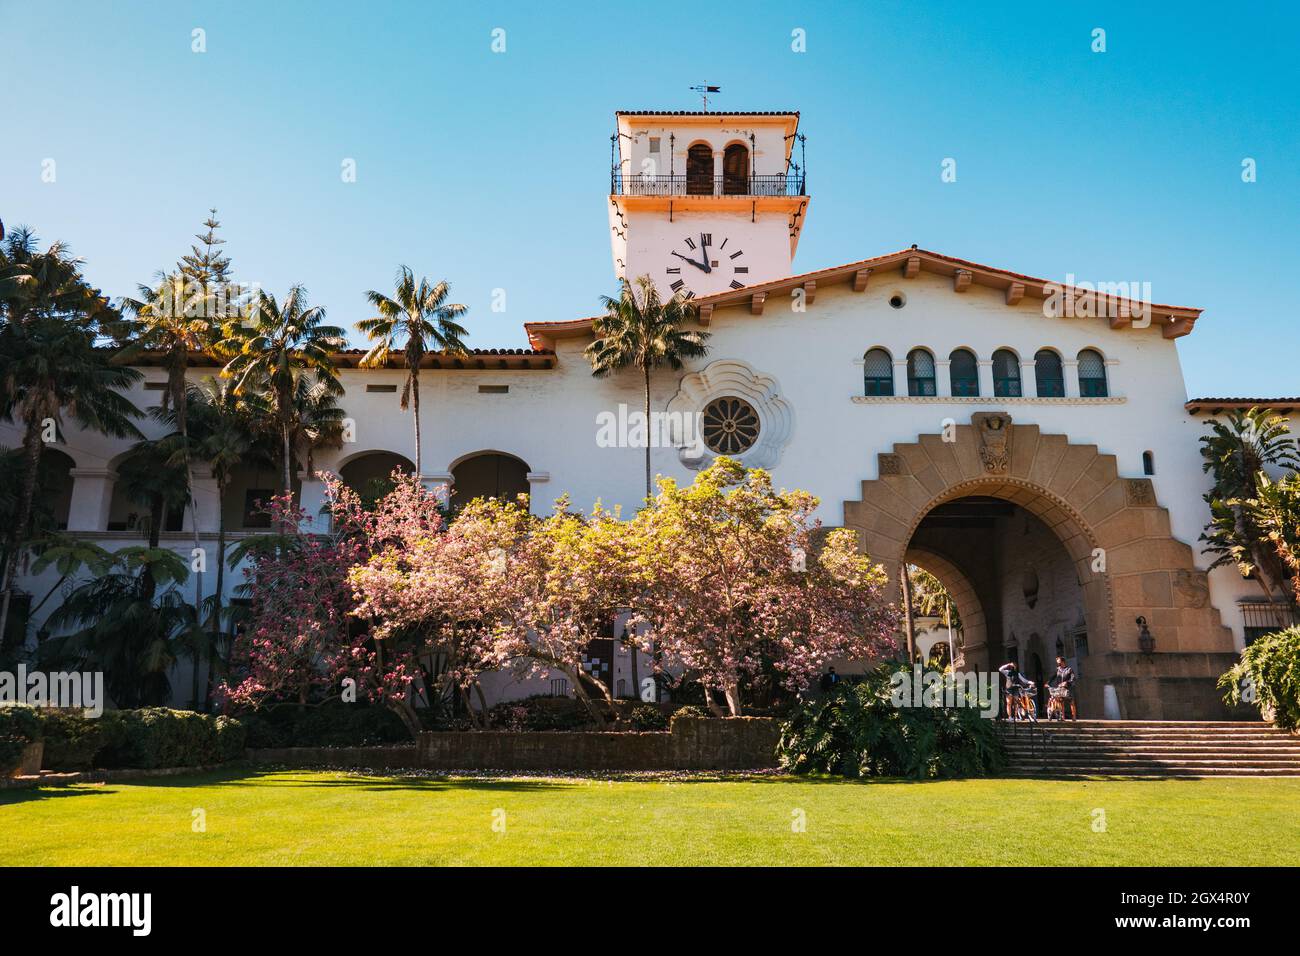 Inside the courtyard and garden of the Spanish Colonial Revival-styled Santa Barbara County Courthouse, California, USA Stock Photo